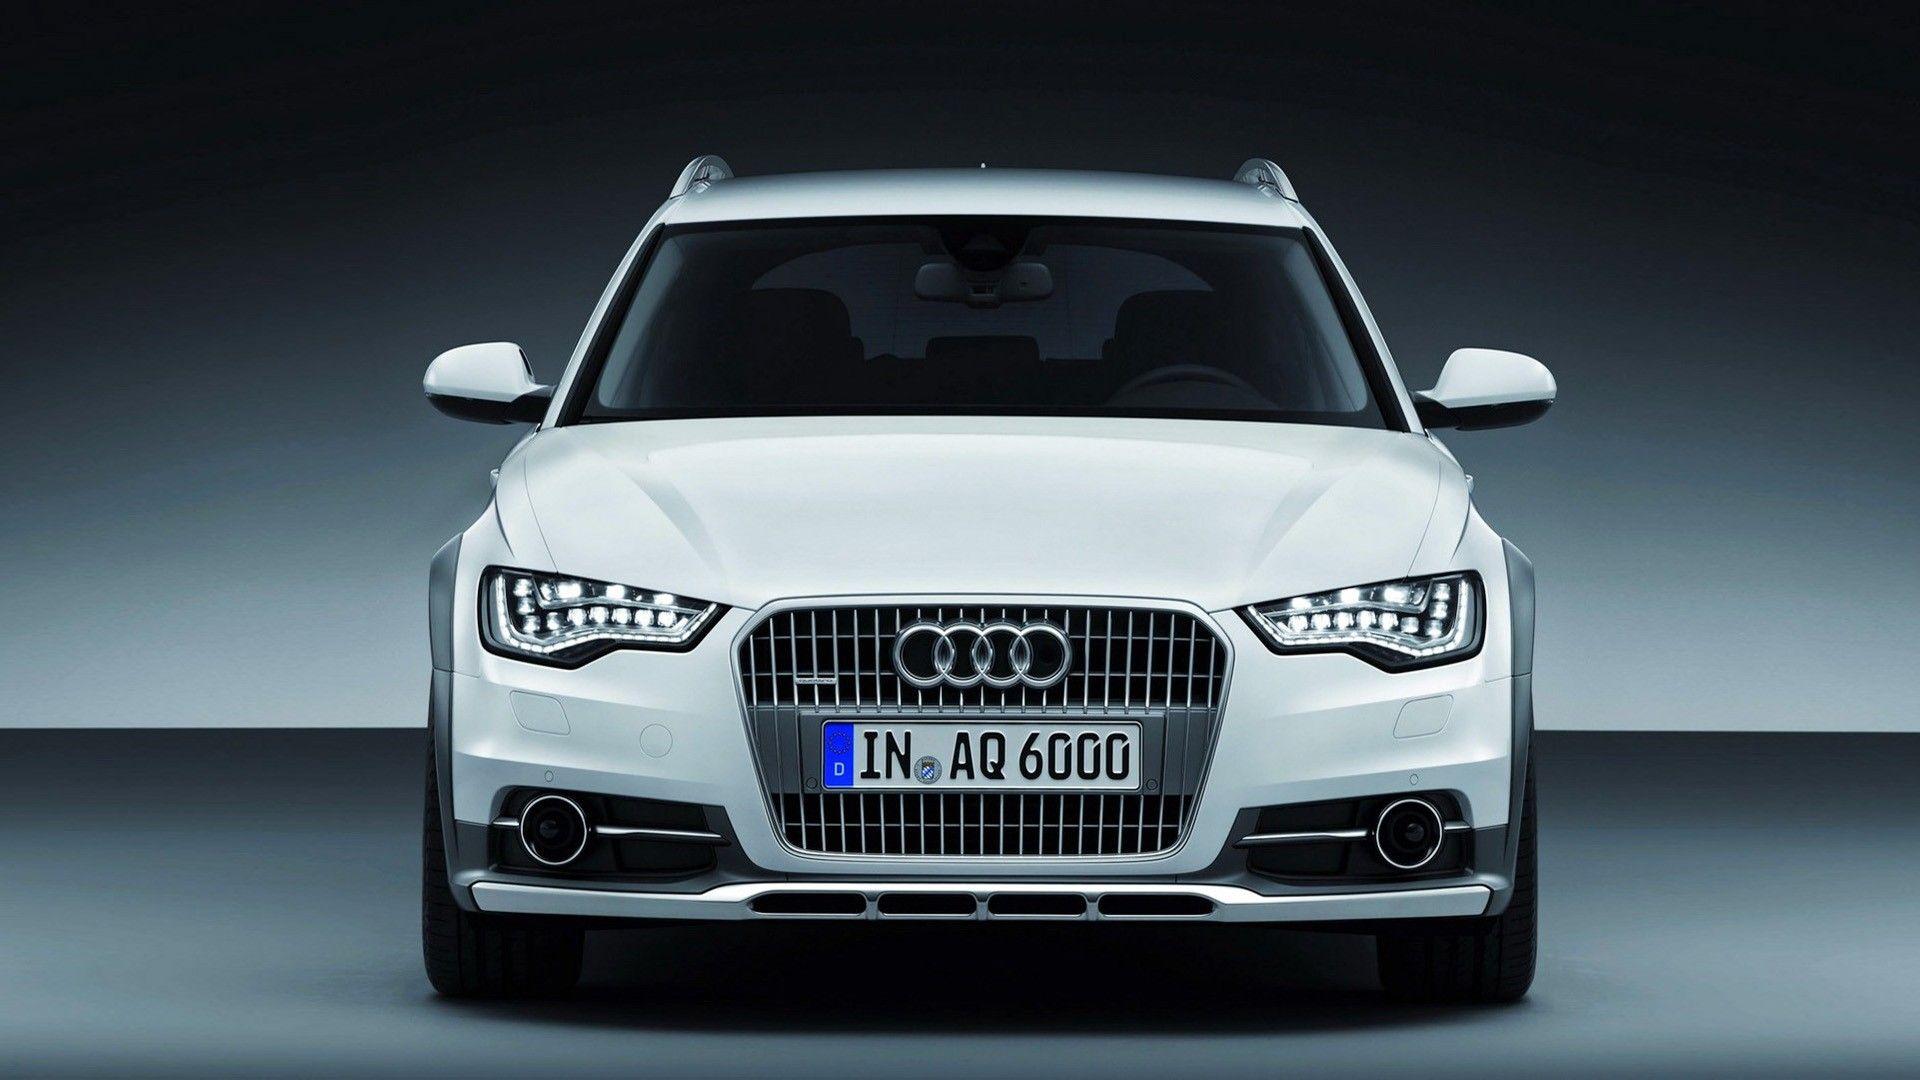 Awesome Audi Cars Full HD Wallpaper High Quality Background A